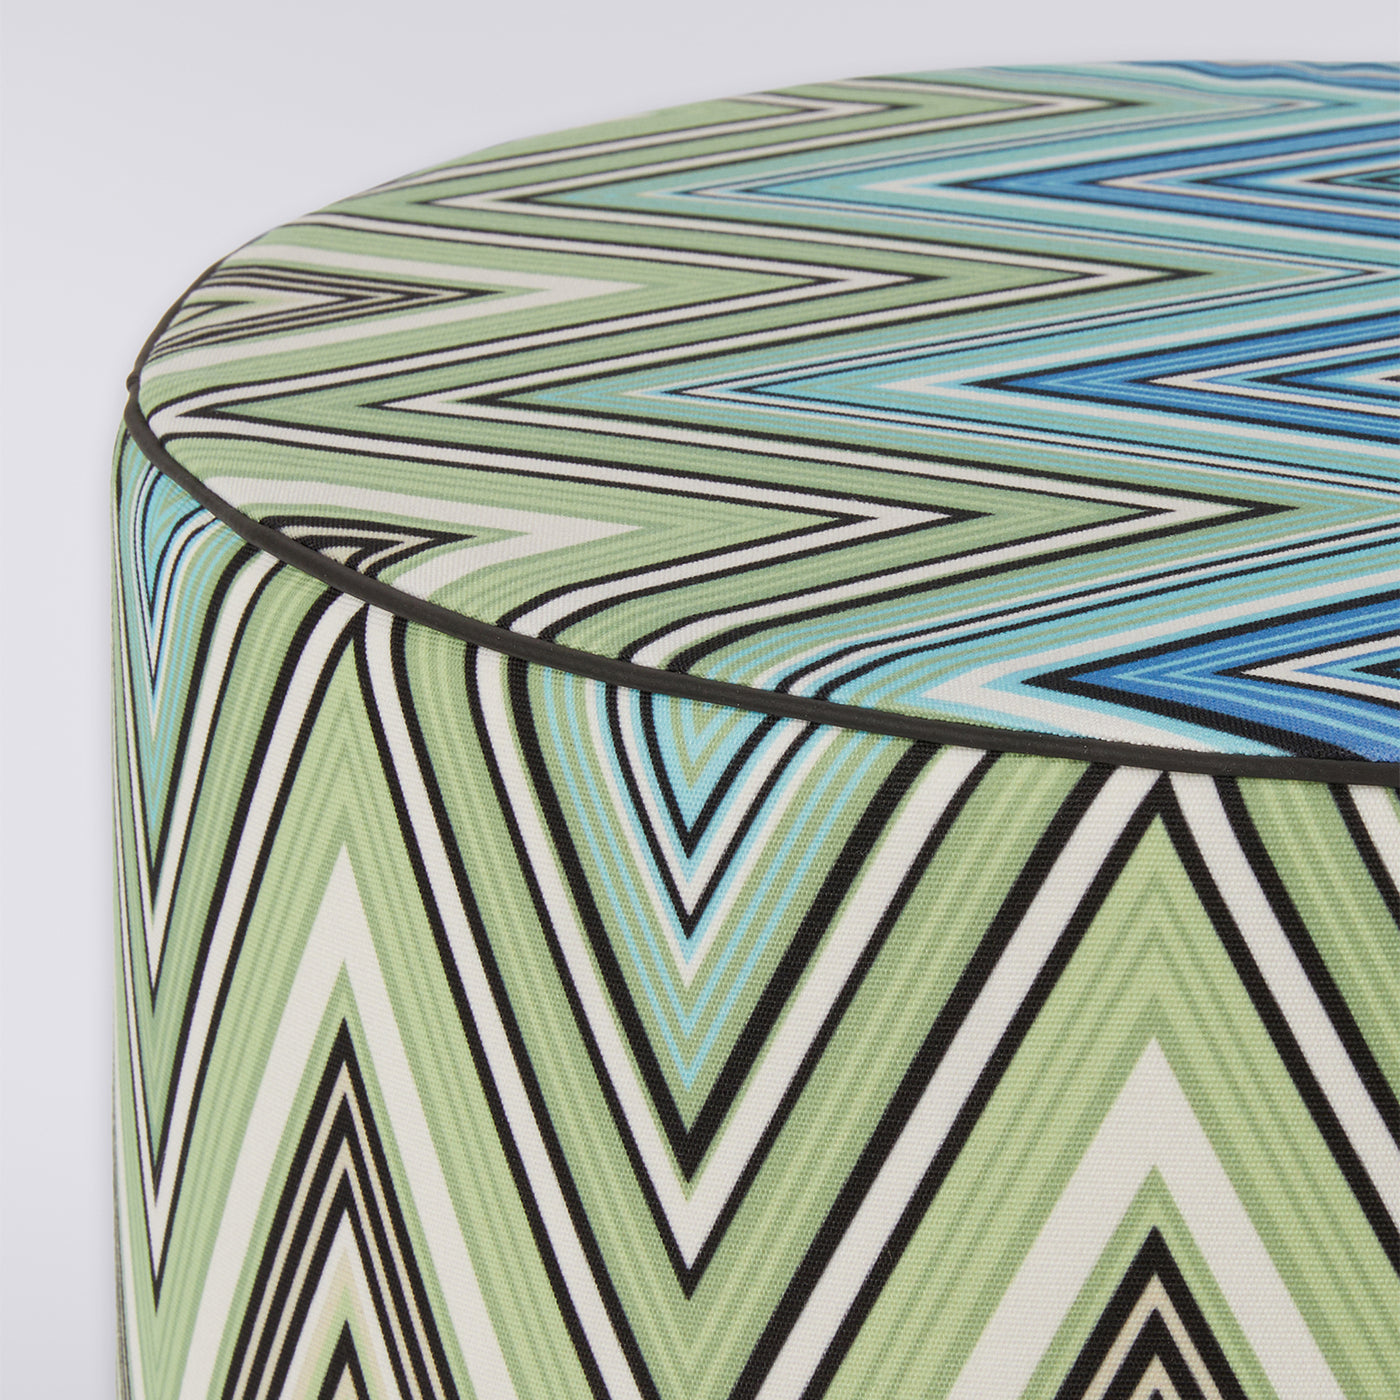 Kew Cylindrical Zigzag Pattern Outdoor Pouf #2 - Alternative view 1